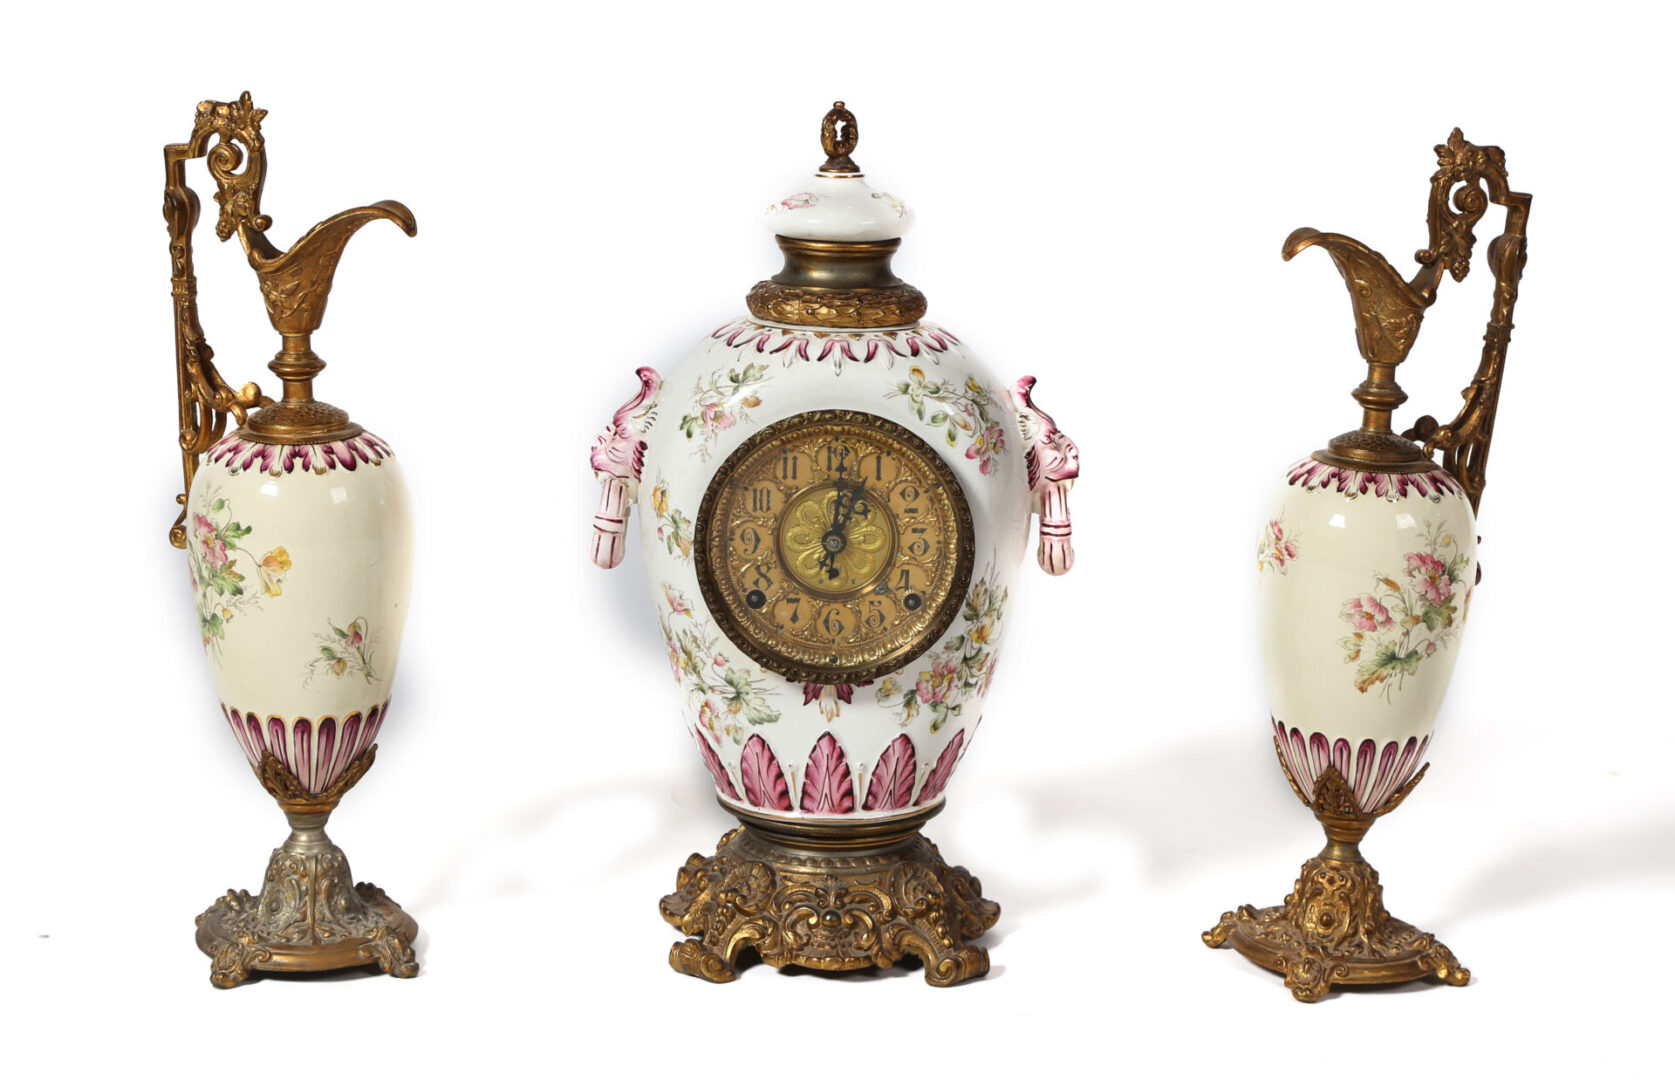 A set of three vases with a clock on top.